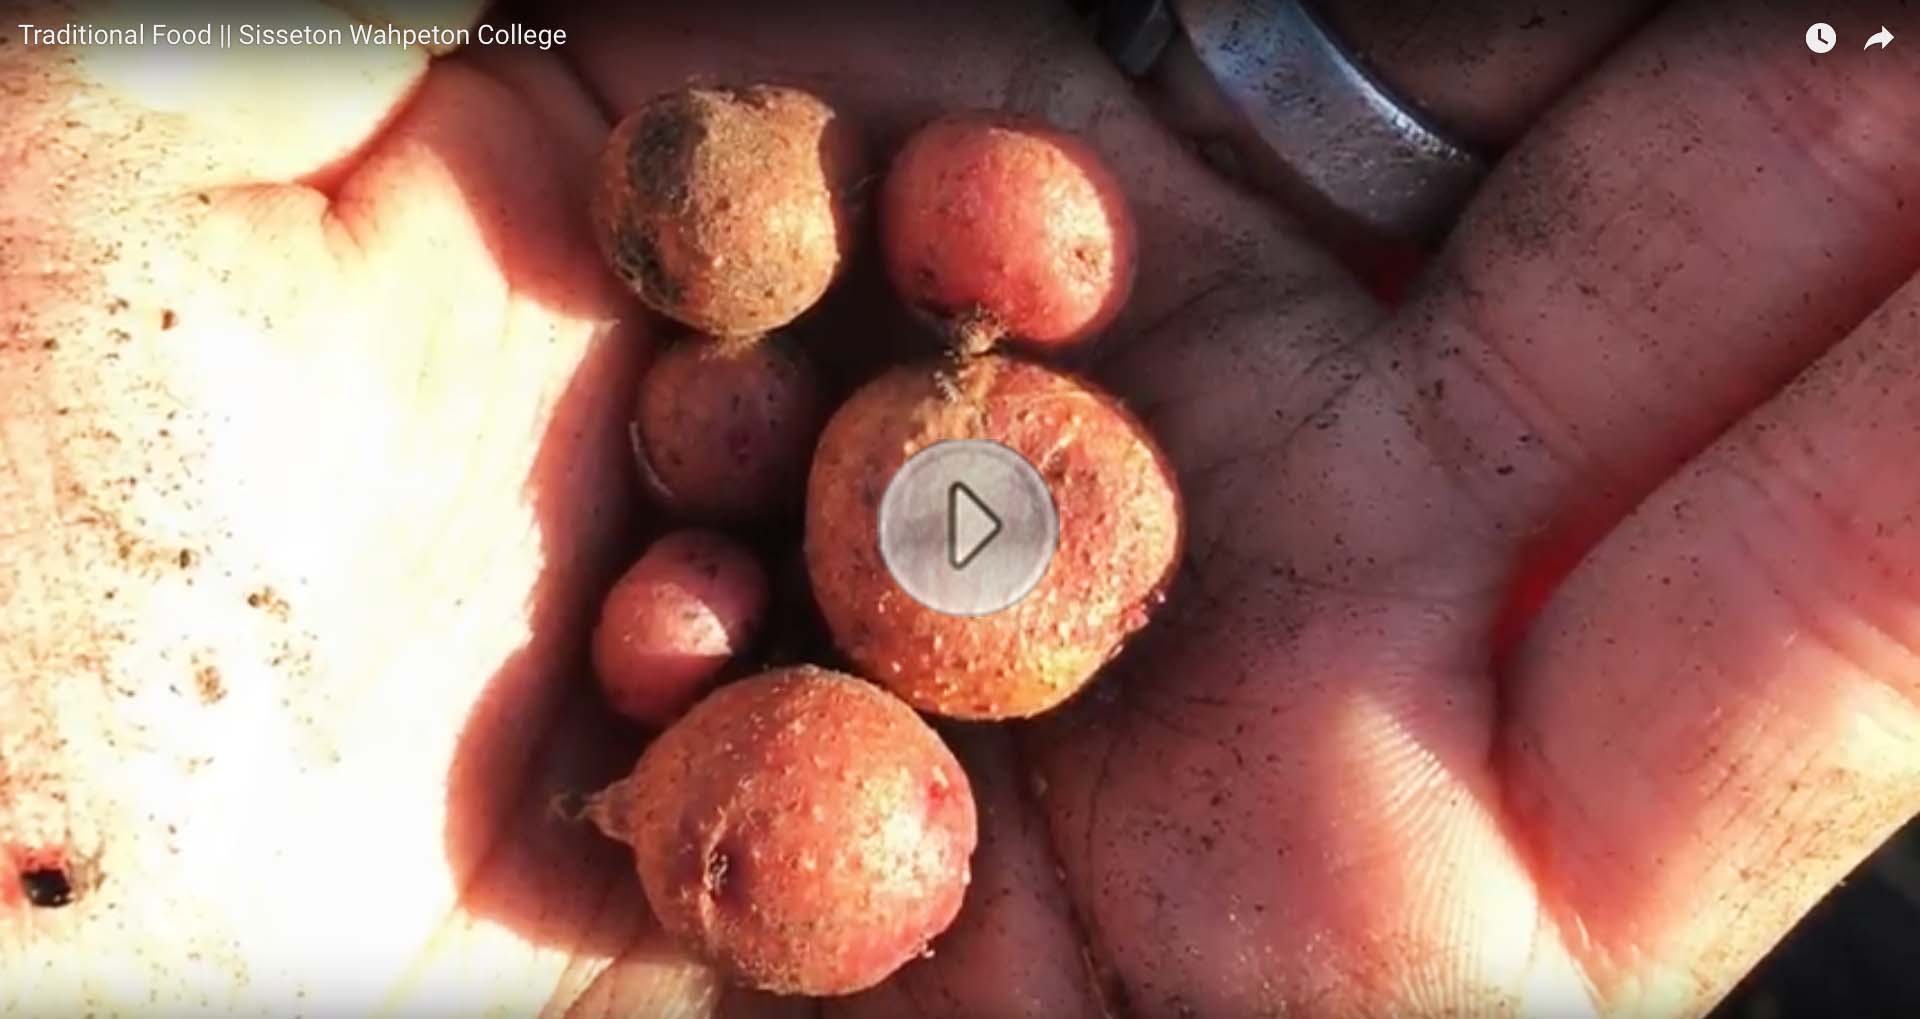 Image of potatoes linked to see Traditional Foods (Ehanna Woyute) Film produced by Sisseton Wahpeton College Students on Traditional Dakota Foods.